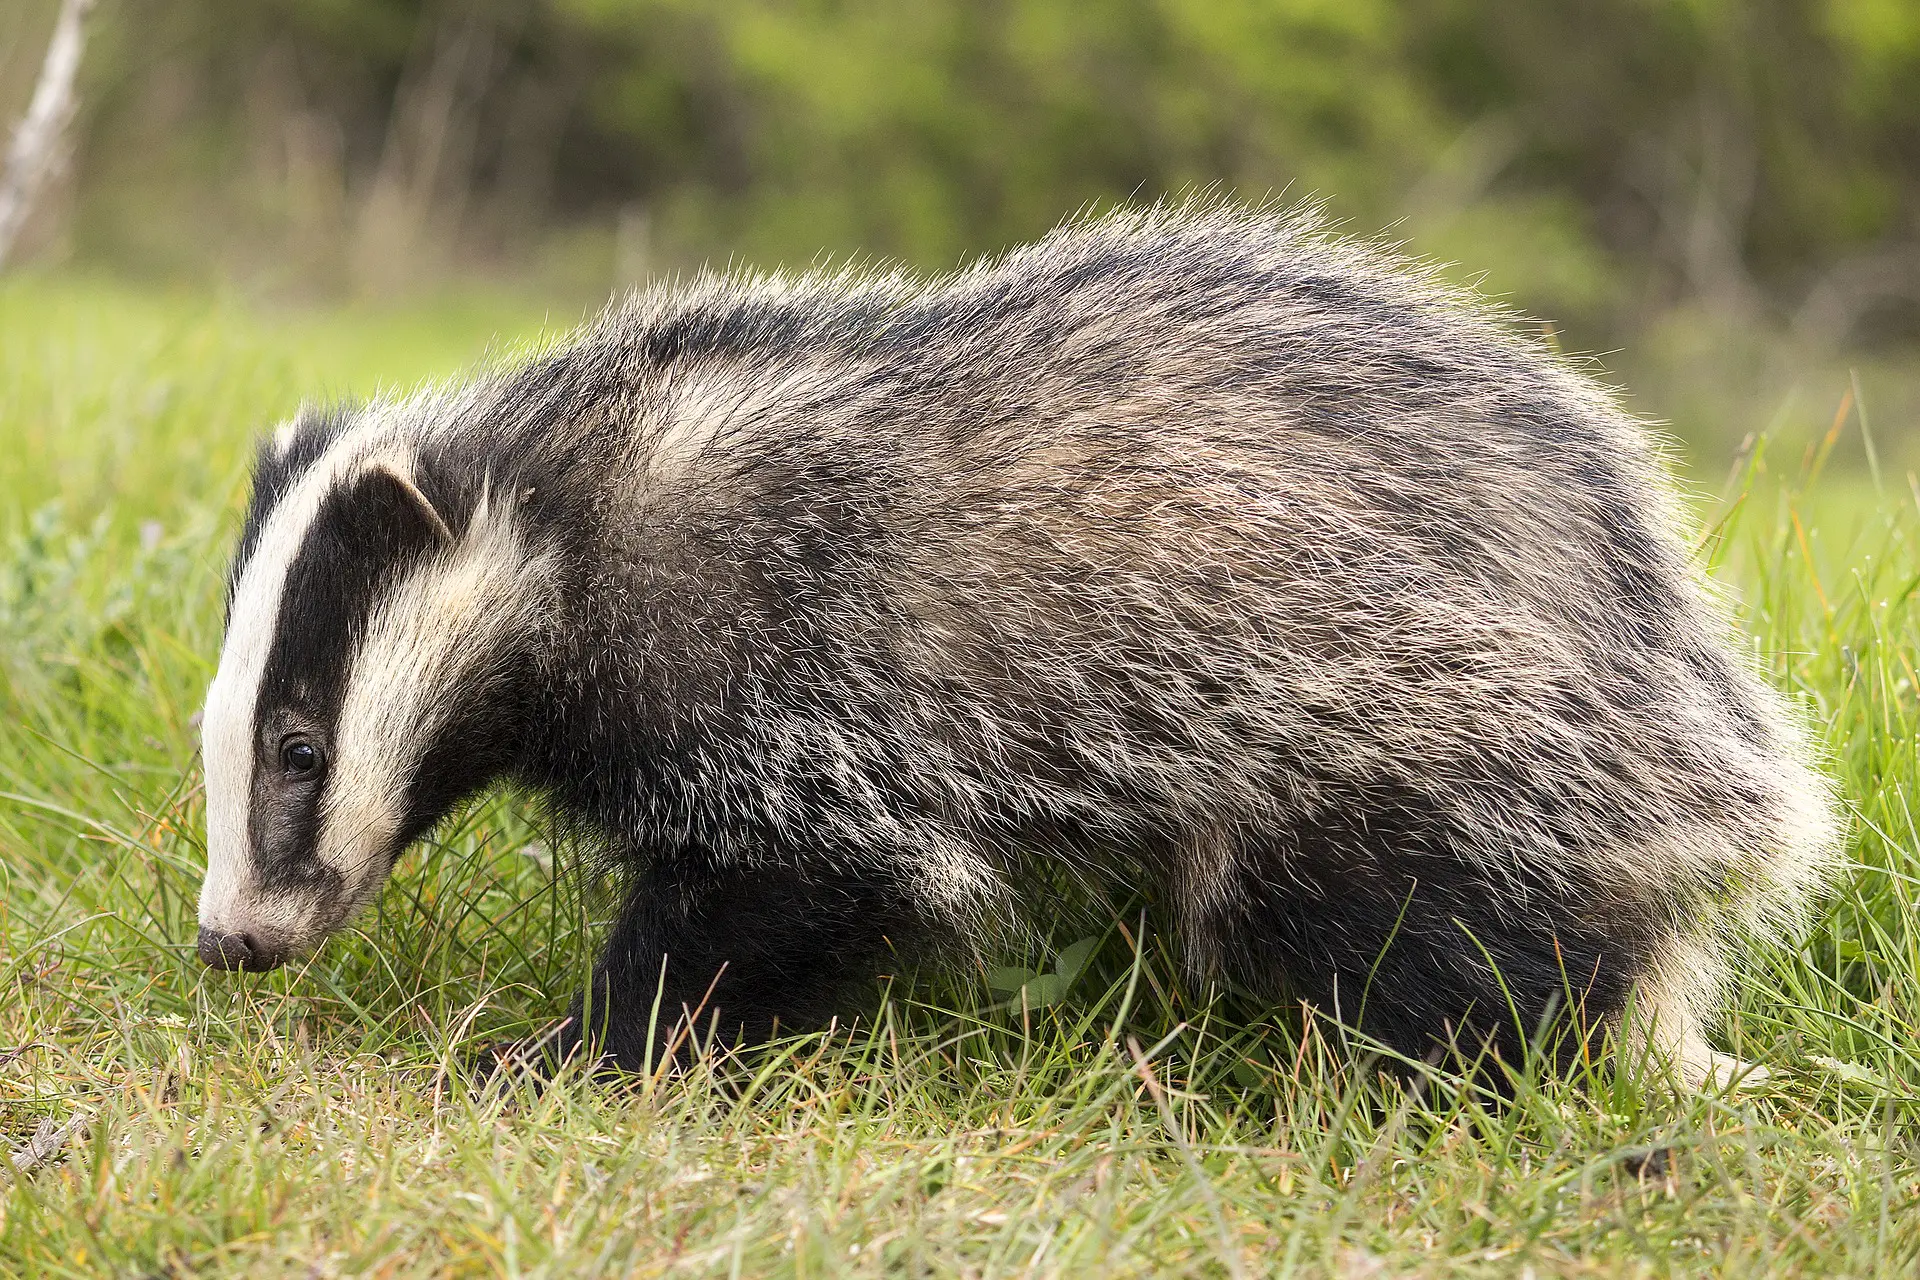 badgers are farmed to make shaving briushes, but the best shaving brush is made from synthetic bristles